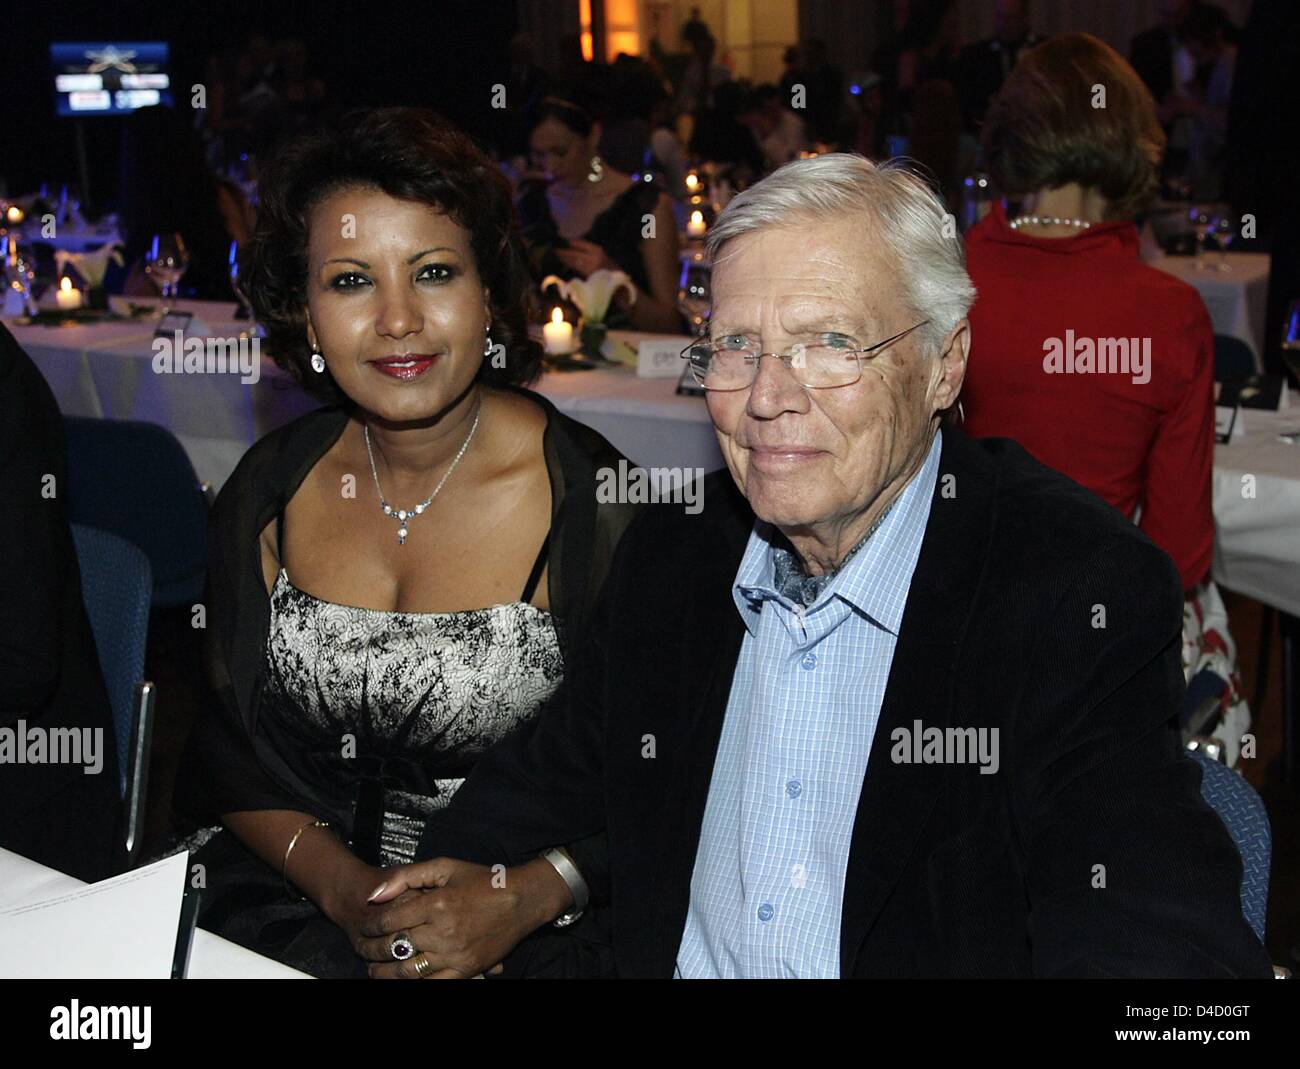 Actor Karlheinz Boehm (R), the founder and chair of the aid organisation 'Menschen fuer Menschen', and his wife Almaz are pictured at the Radio Regenbogen Awards in Karlsruhe, Germany, 08 March 2008. The Radio Regenbogen Award, also known under its official title as 'Media Award of Baden Wuerttemberg', is not endowed and has been awarded annually since 1998. Photo: Marijan Murat Stock Photo